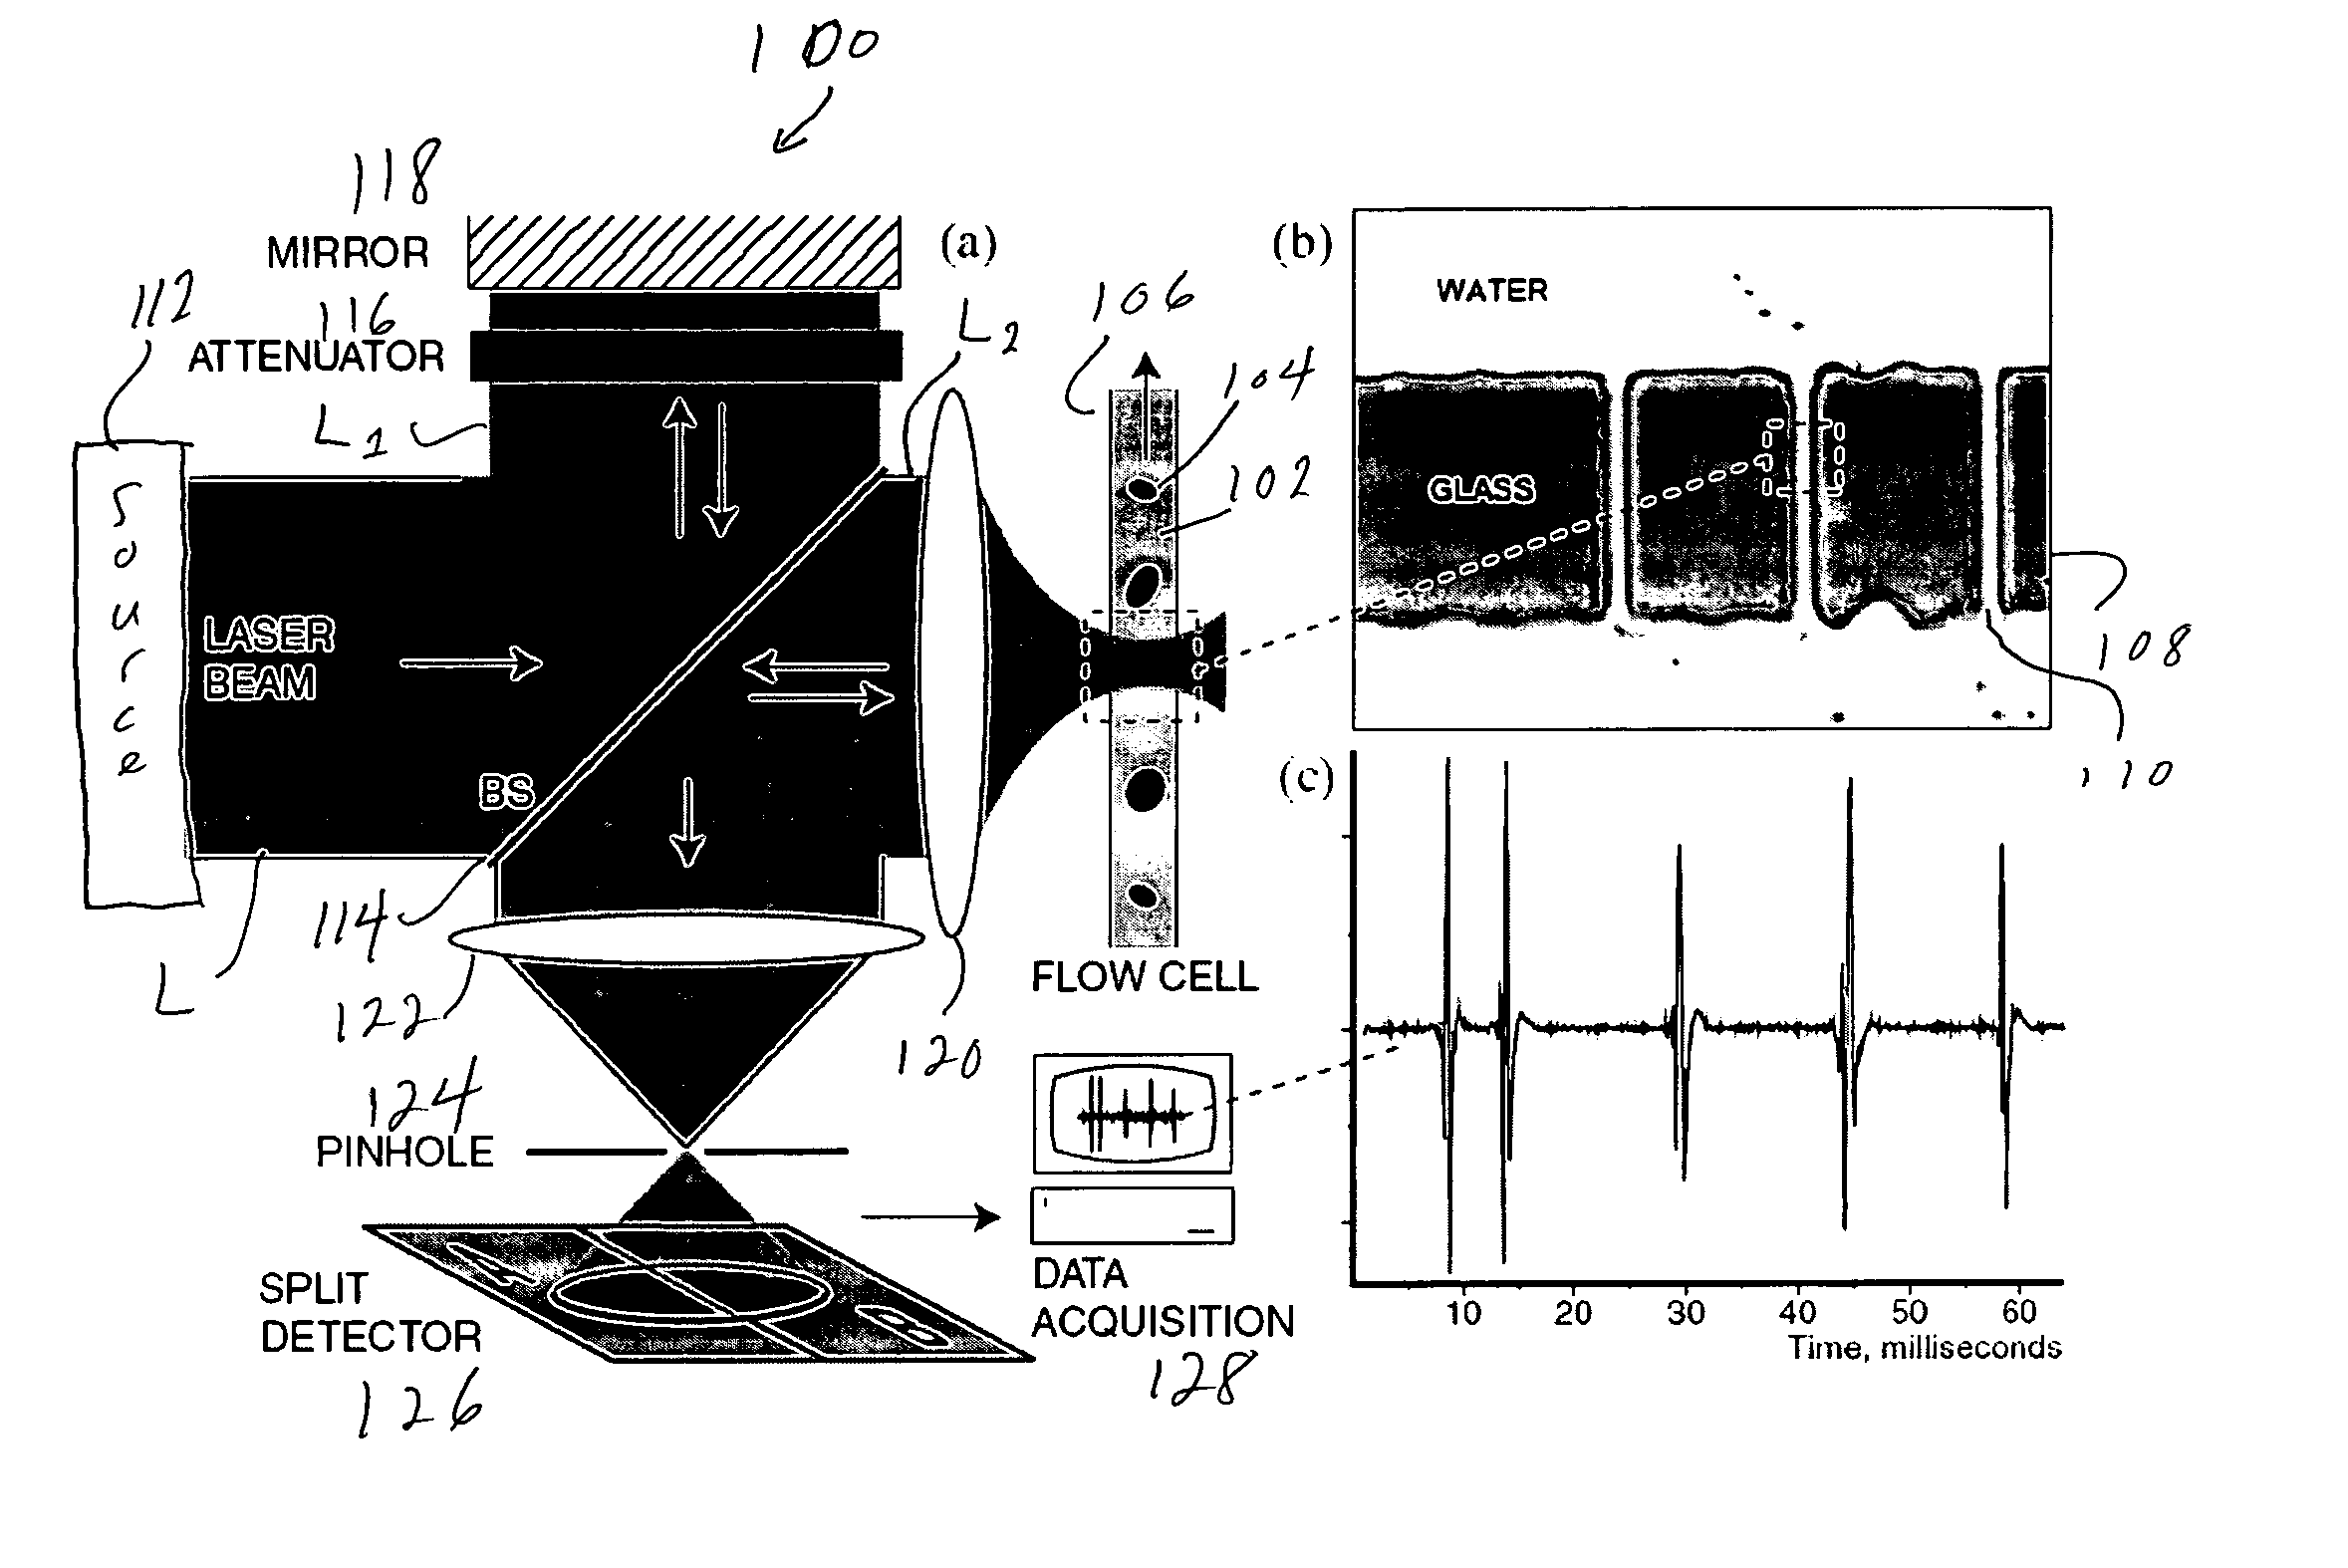 Apparatus and method for sizing nanoparticles based on optical forces and interferometric field detection